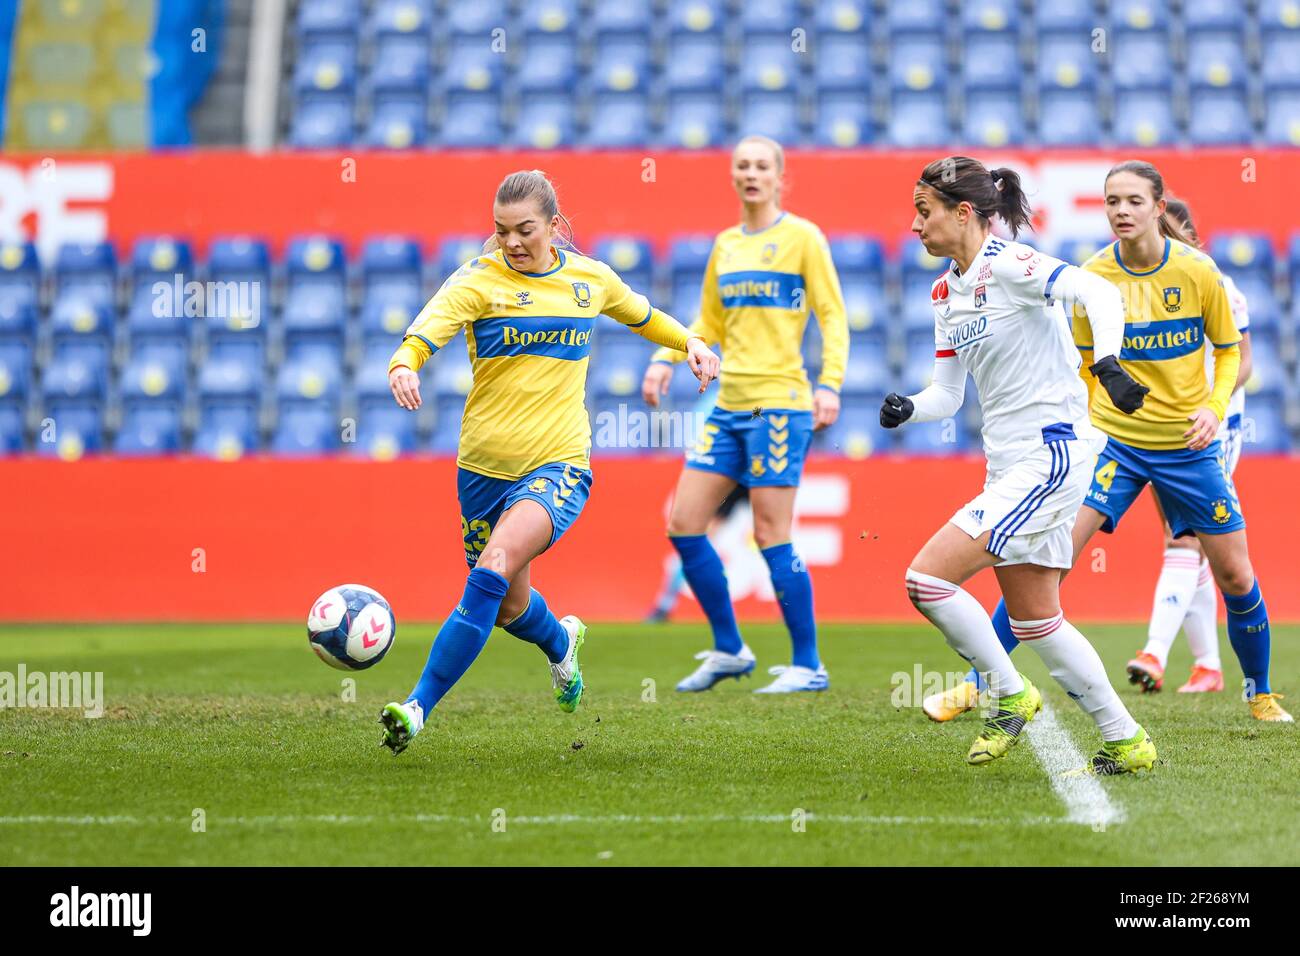 Brondby, Denmark. 10th Mar, 2021. Malin Sunde (23) of Brondby IF seen  during the UEFA Women's Champions League match between Brondby IF and  Olympique Lyon at Brondby Stadion in Broendby, Denmark. (Photo